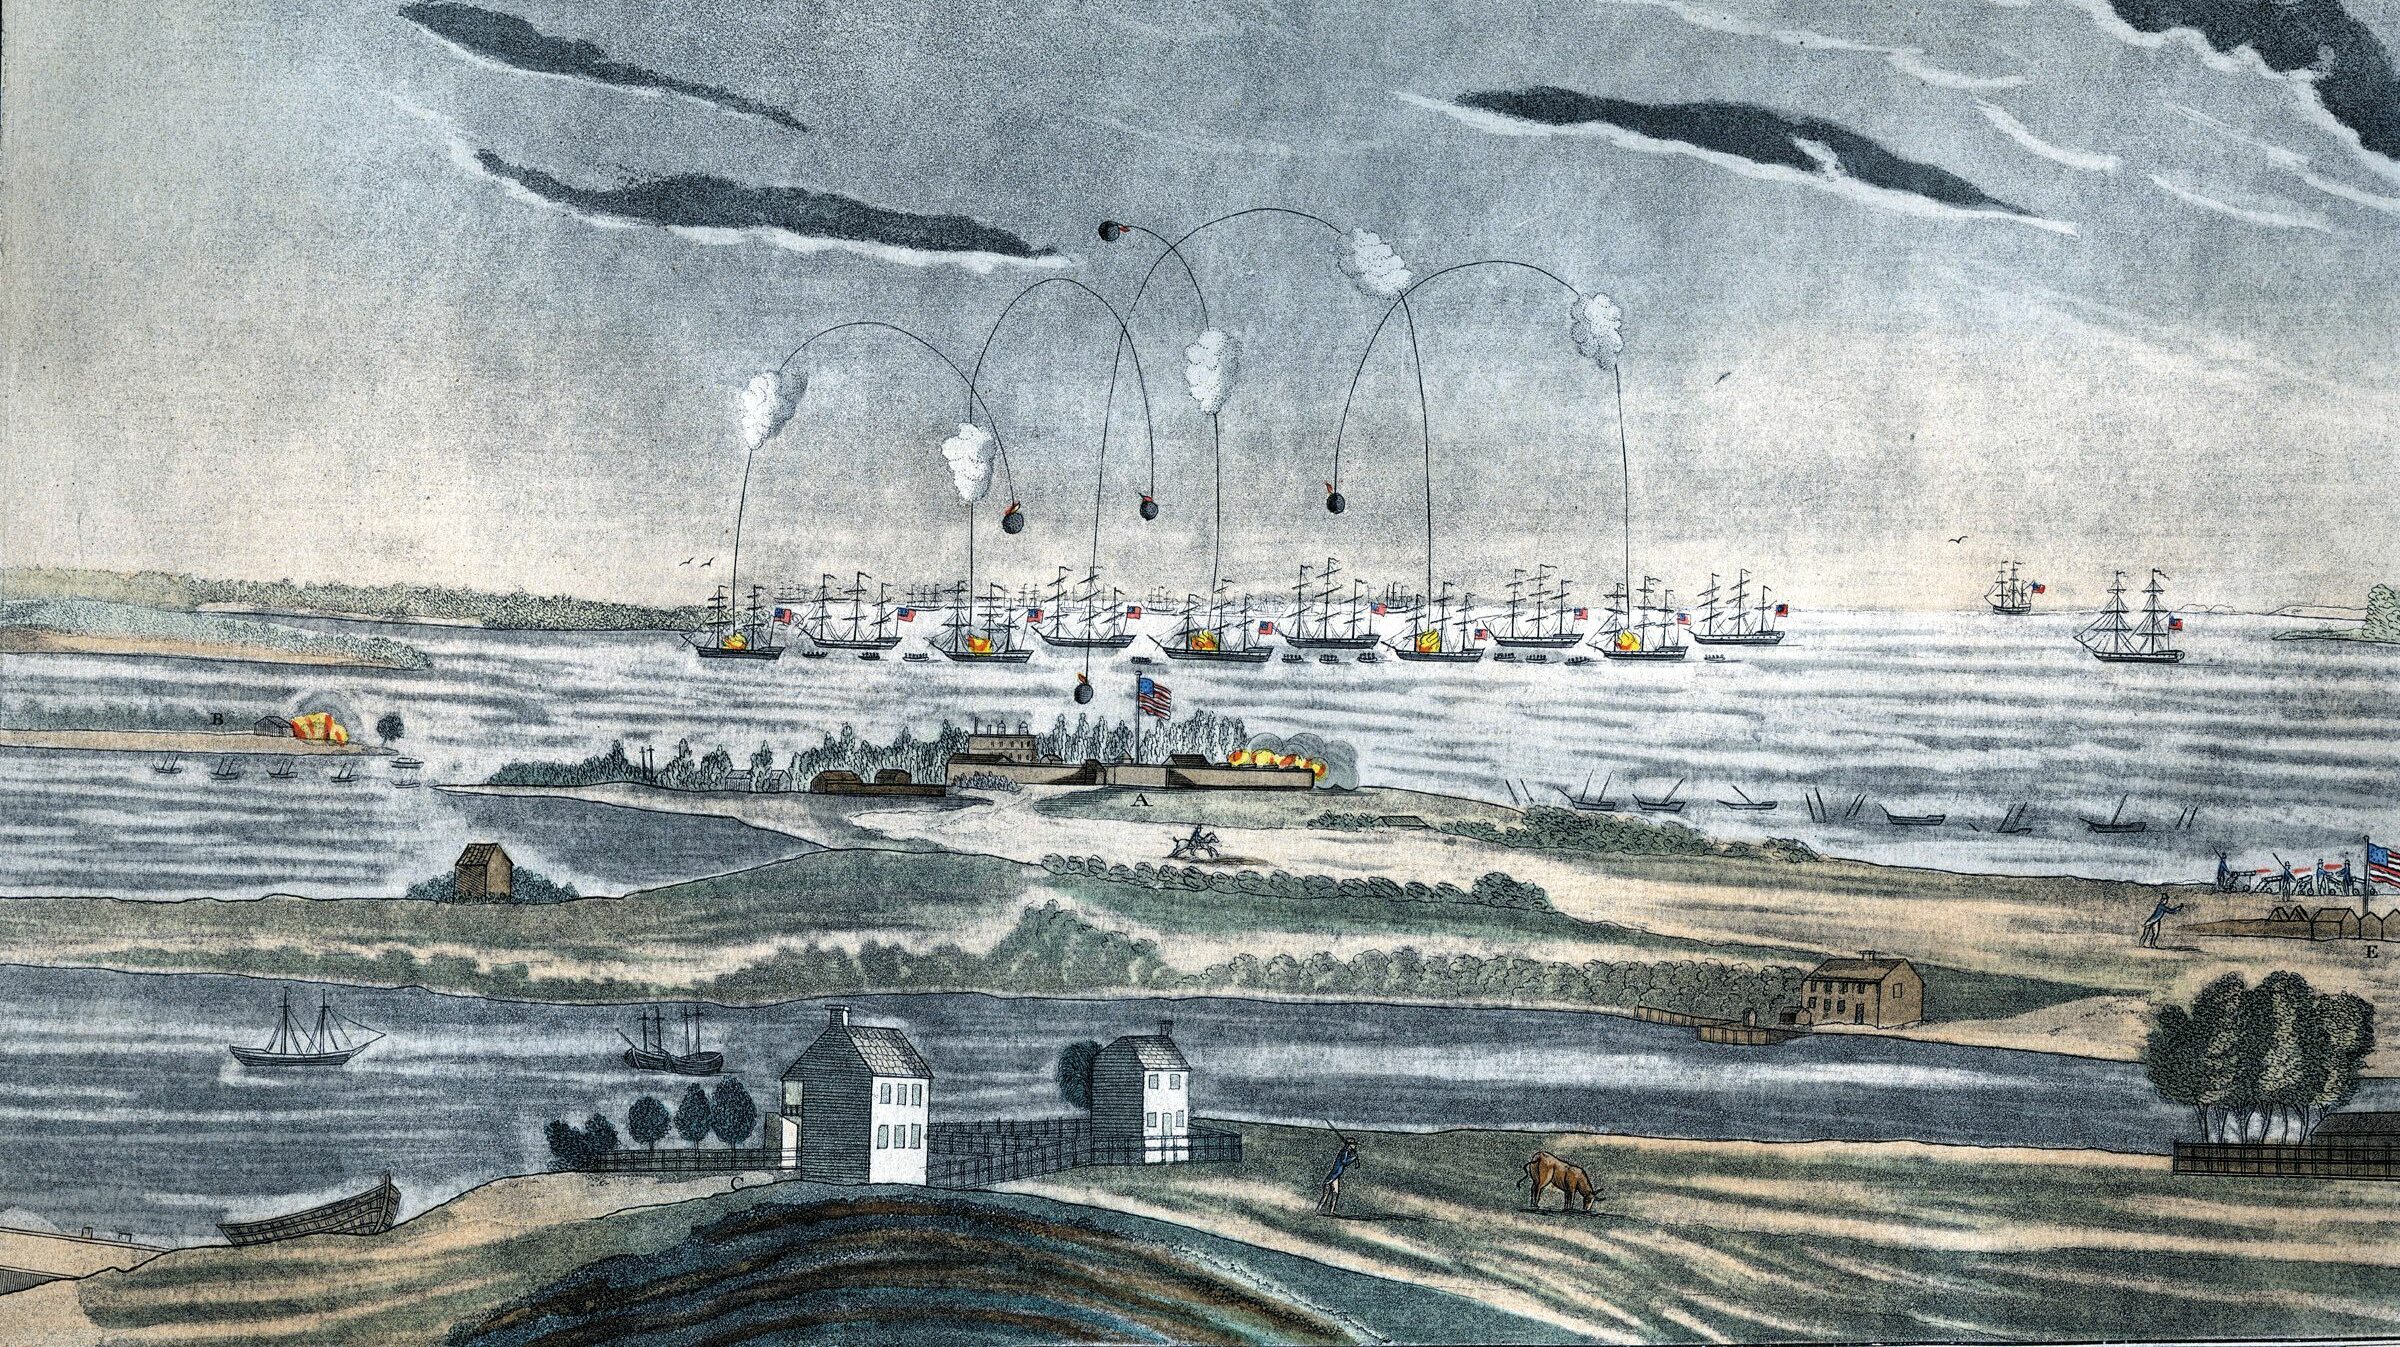 The British bombardment of Fort McHenry, center, opened on the morning of September 13, 1814. Lazaretto Point is shown at left, Fort Covington at right. Sunken ships were used to block the inner harbor.